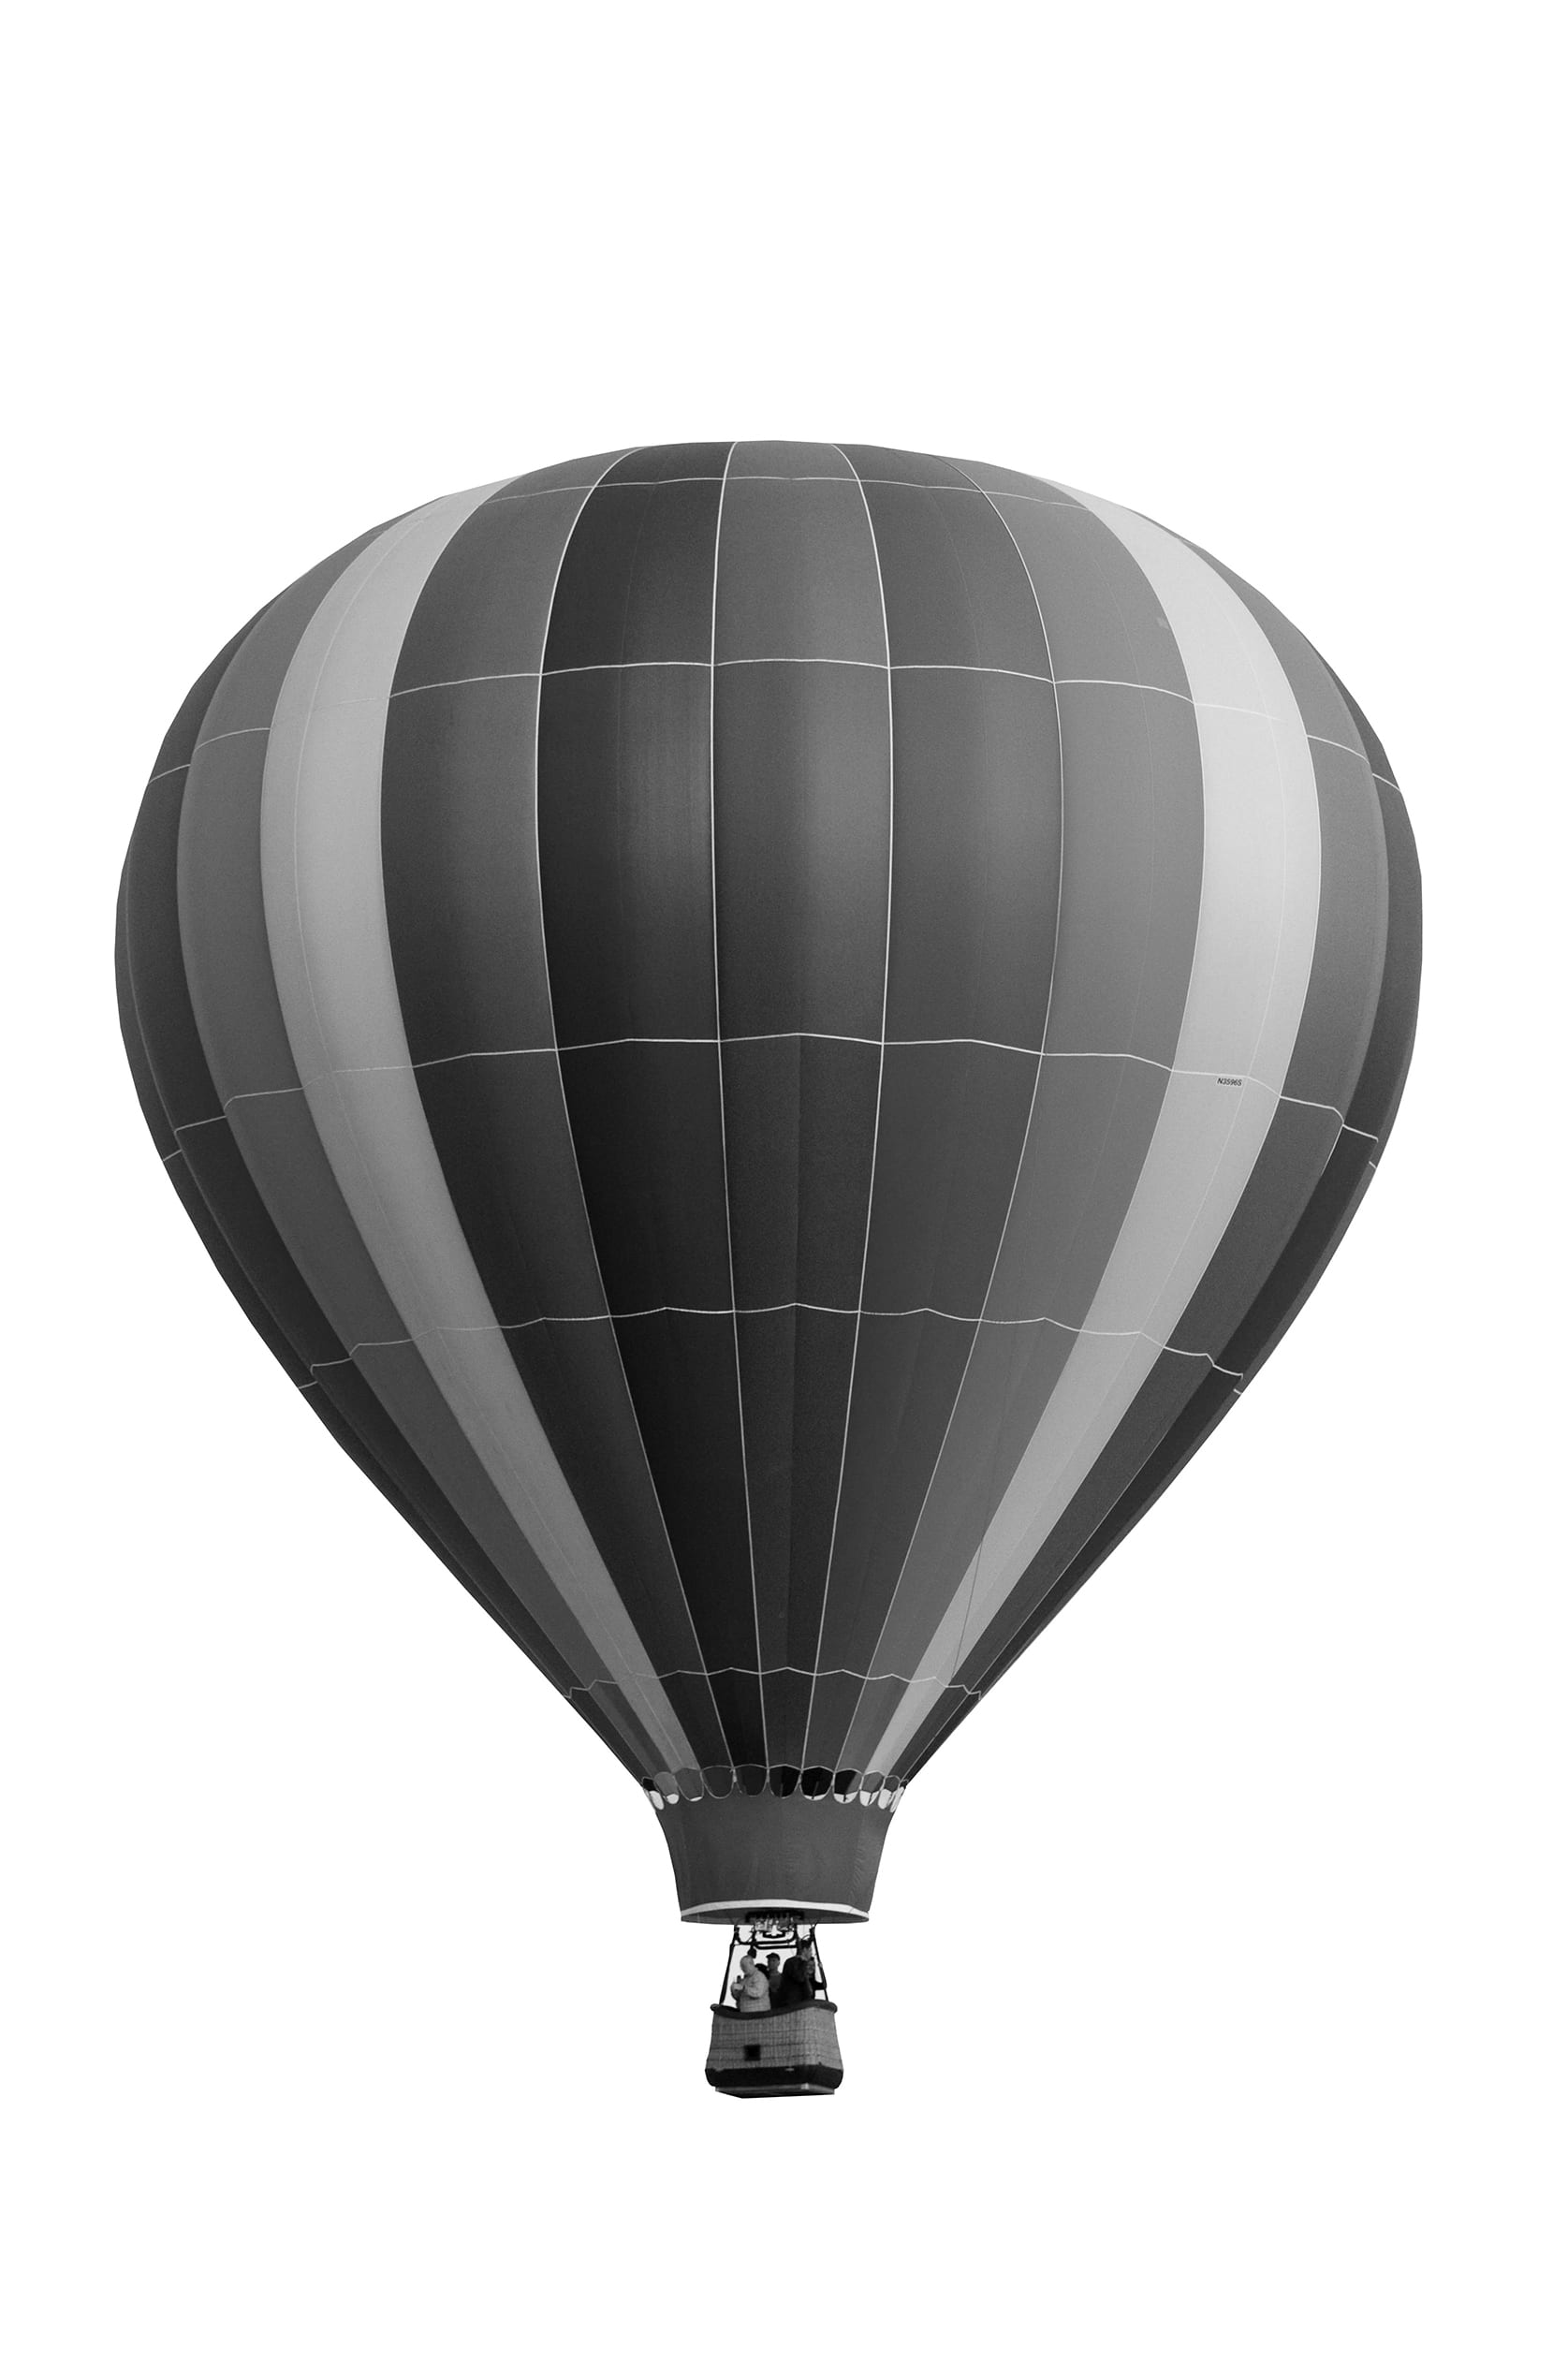 Black and white image of a striped hot air balloon among the clouds